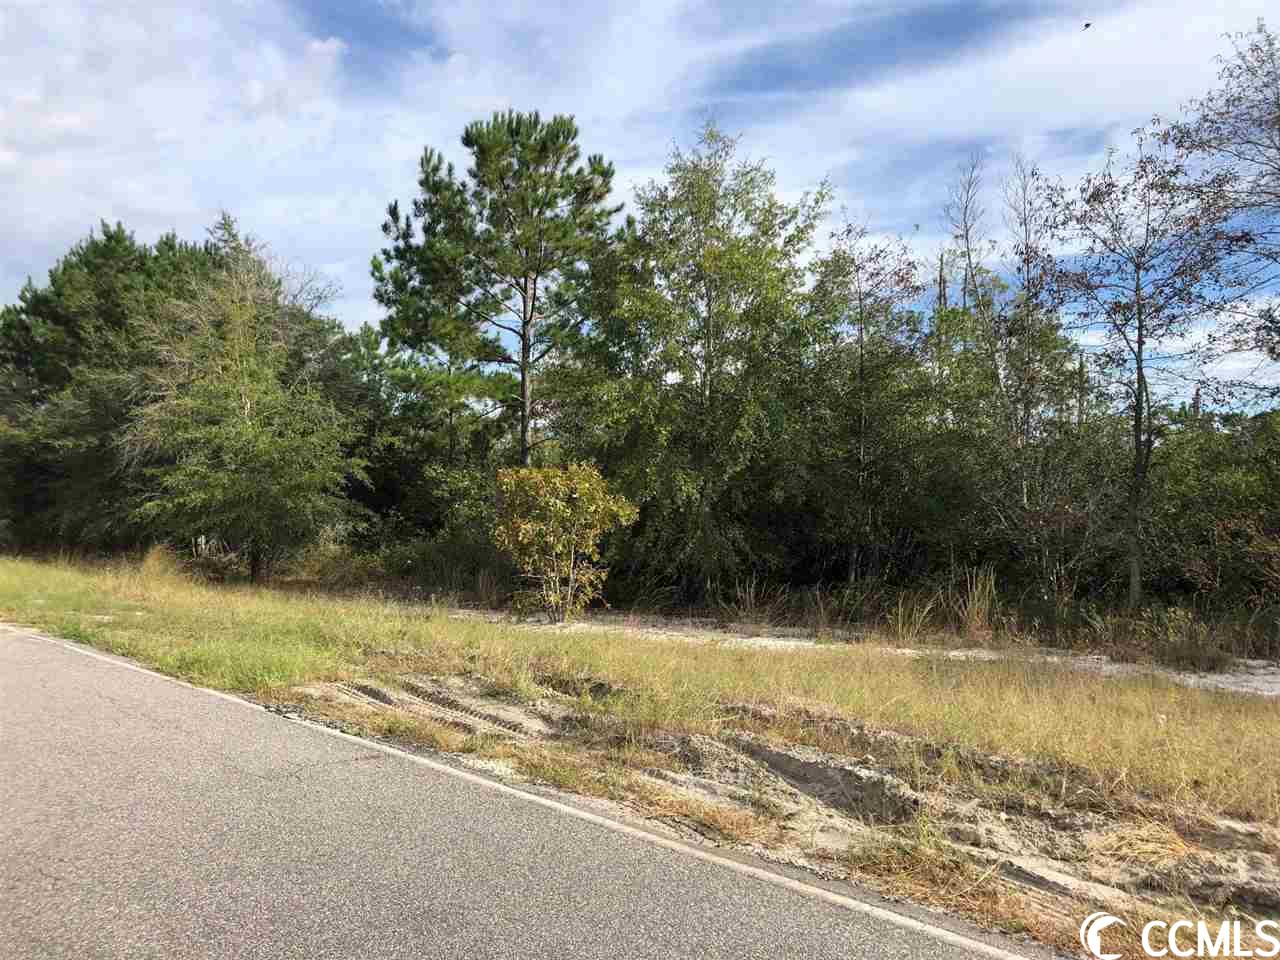 lot 6 in sand hill estates.  this 1 acre lot is ready to go with water available and 125 feet fronting frances marion drive.  buyers agent is responsible for measurements.